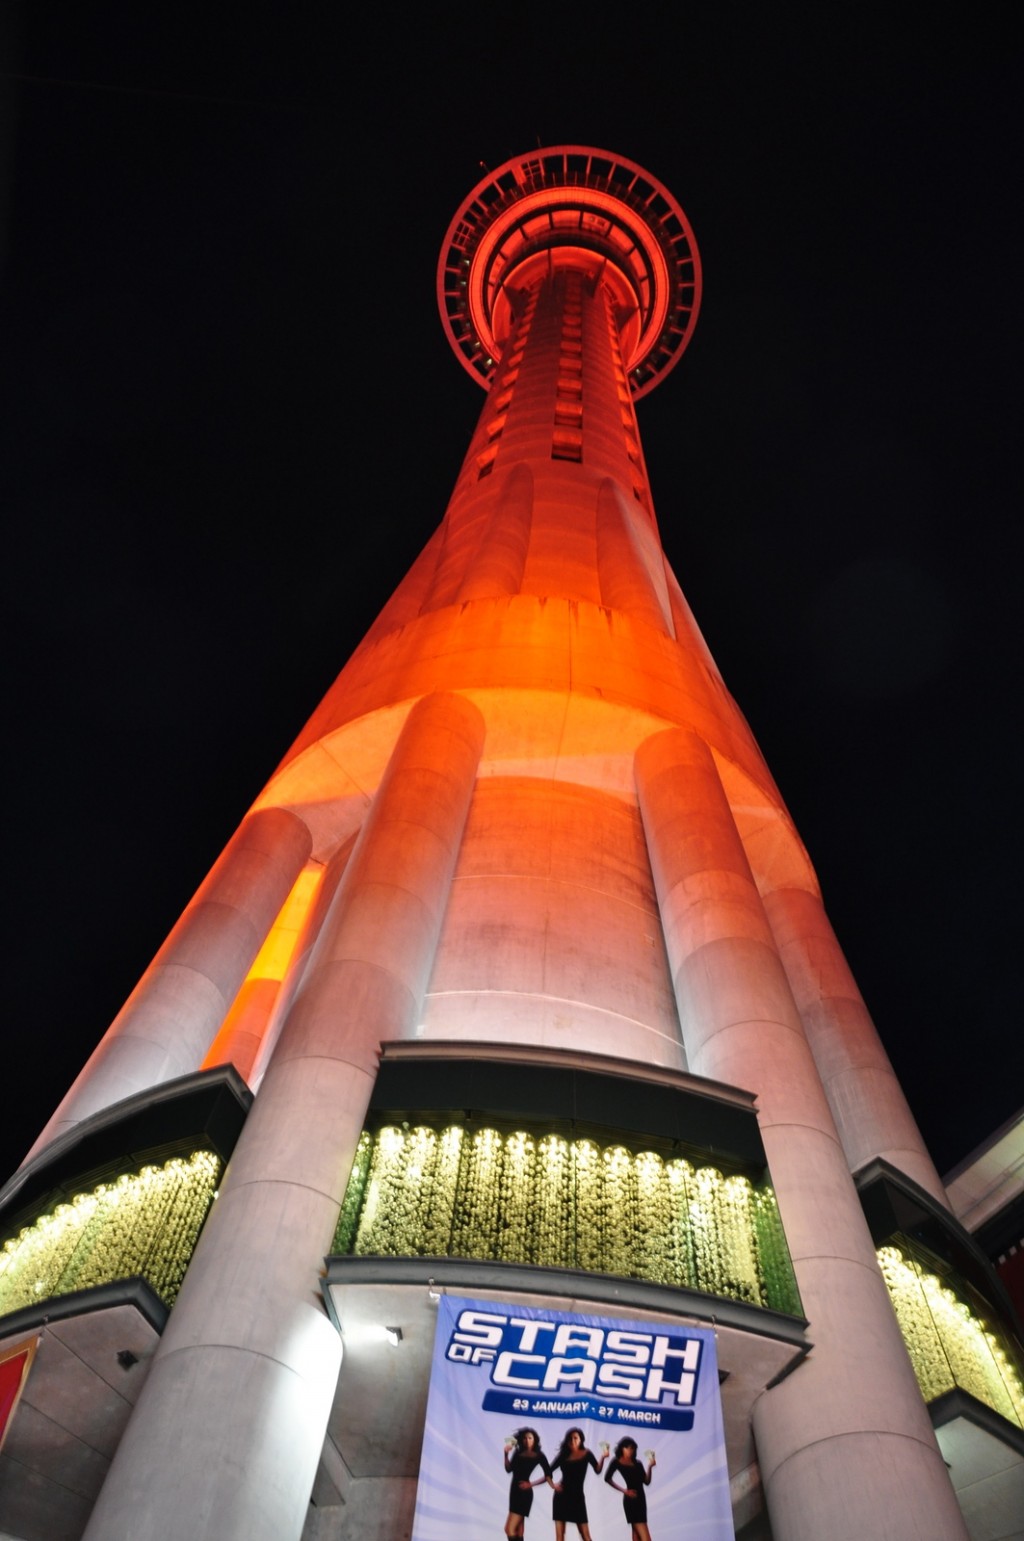 The Sky Tower is lit up beautifully at night